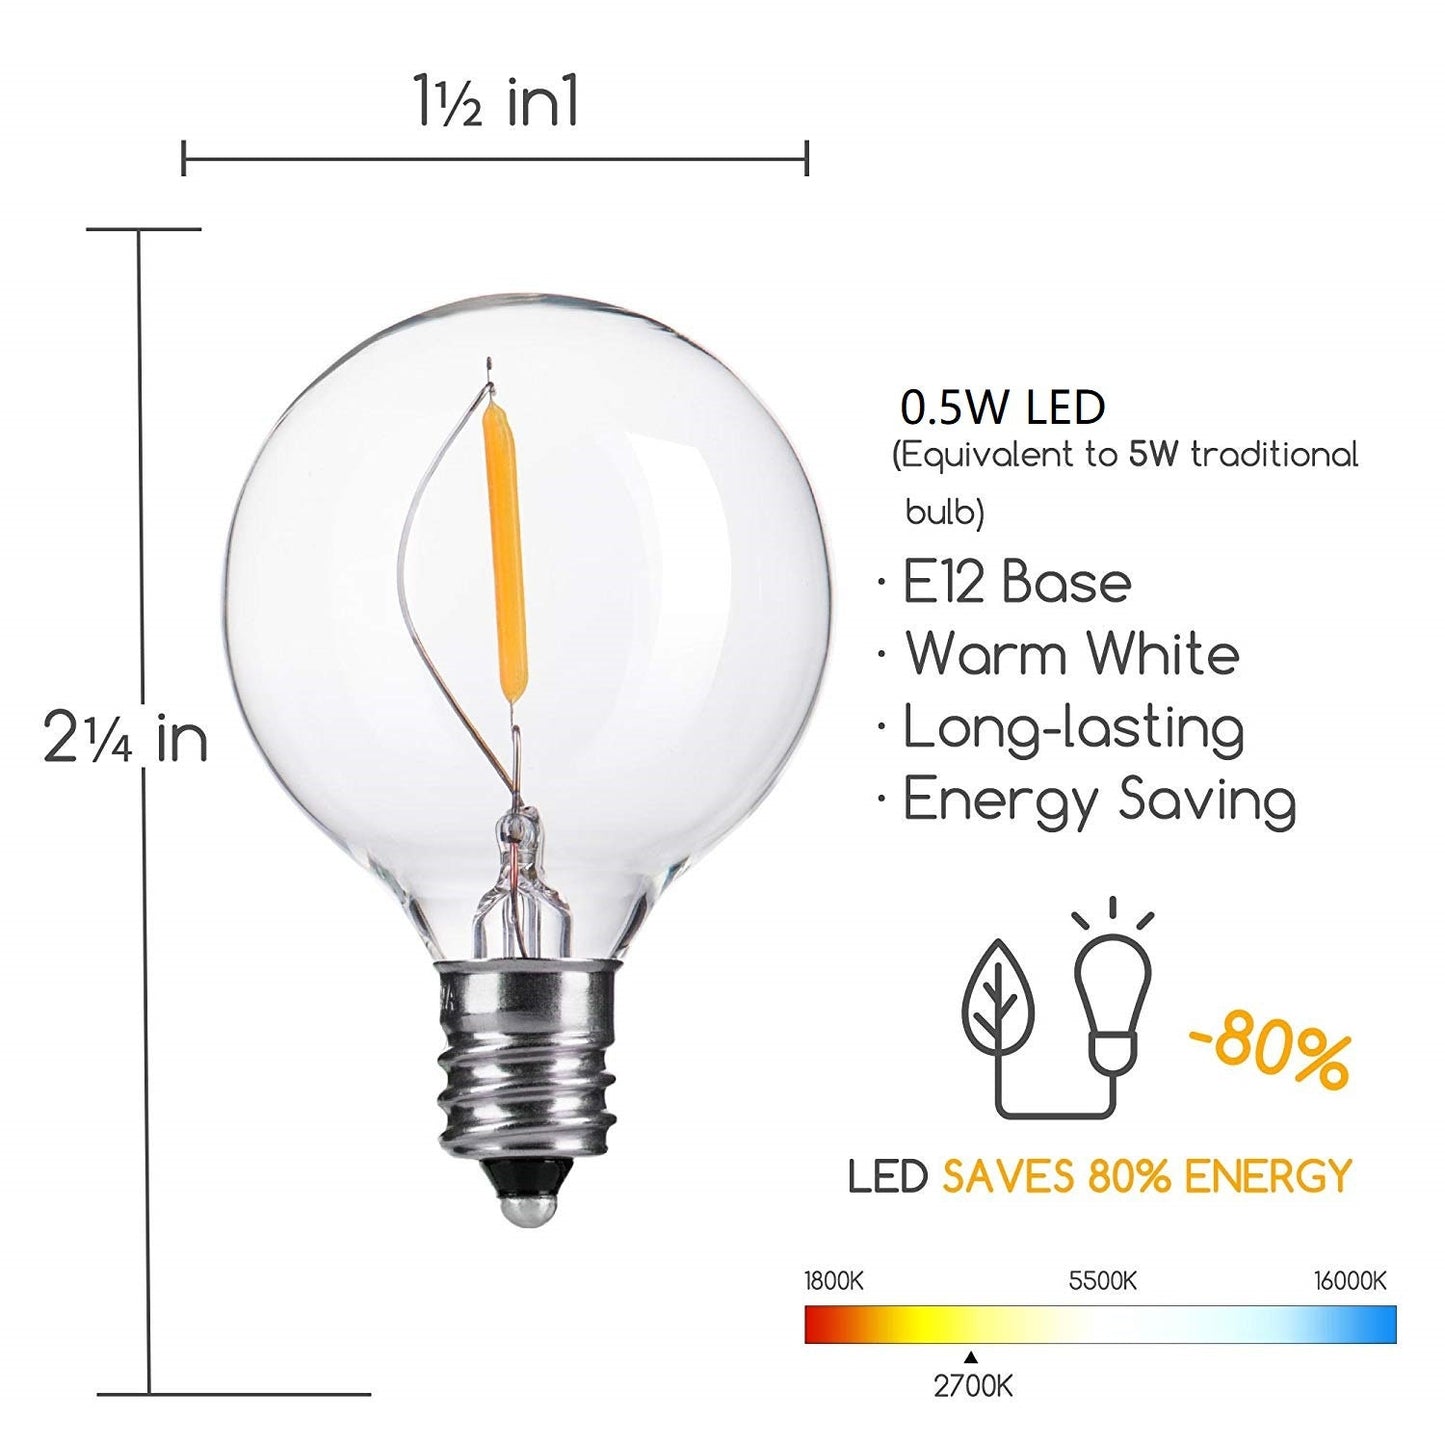 Pack of 25 Globe G40 LED Light Bulbs For String Lights Replacement Bulbs Fits E12 and C7 Base